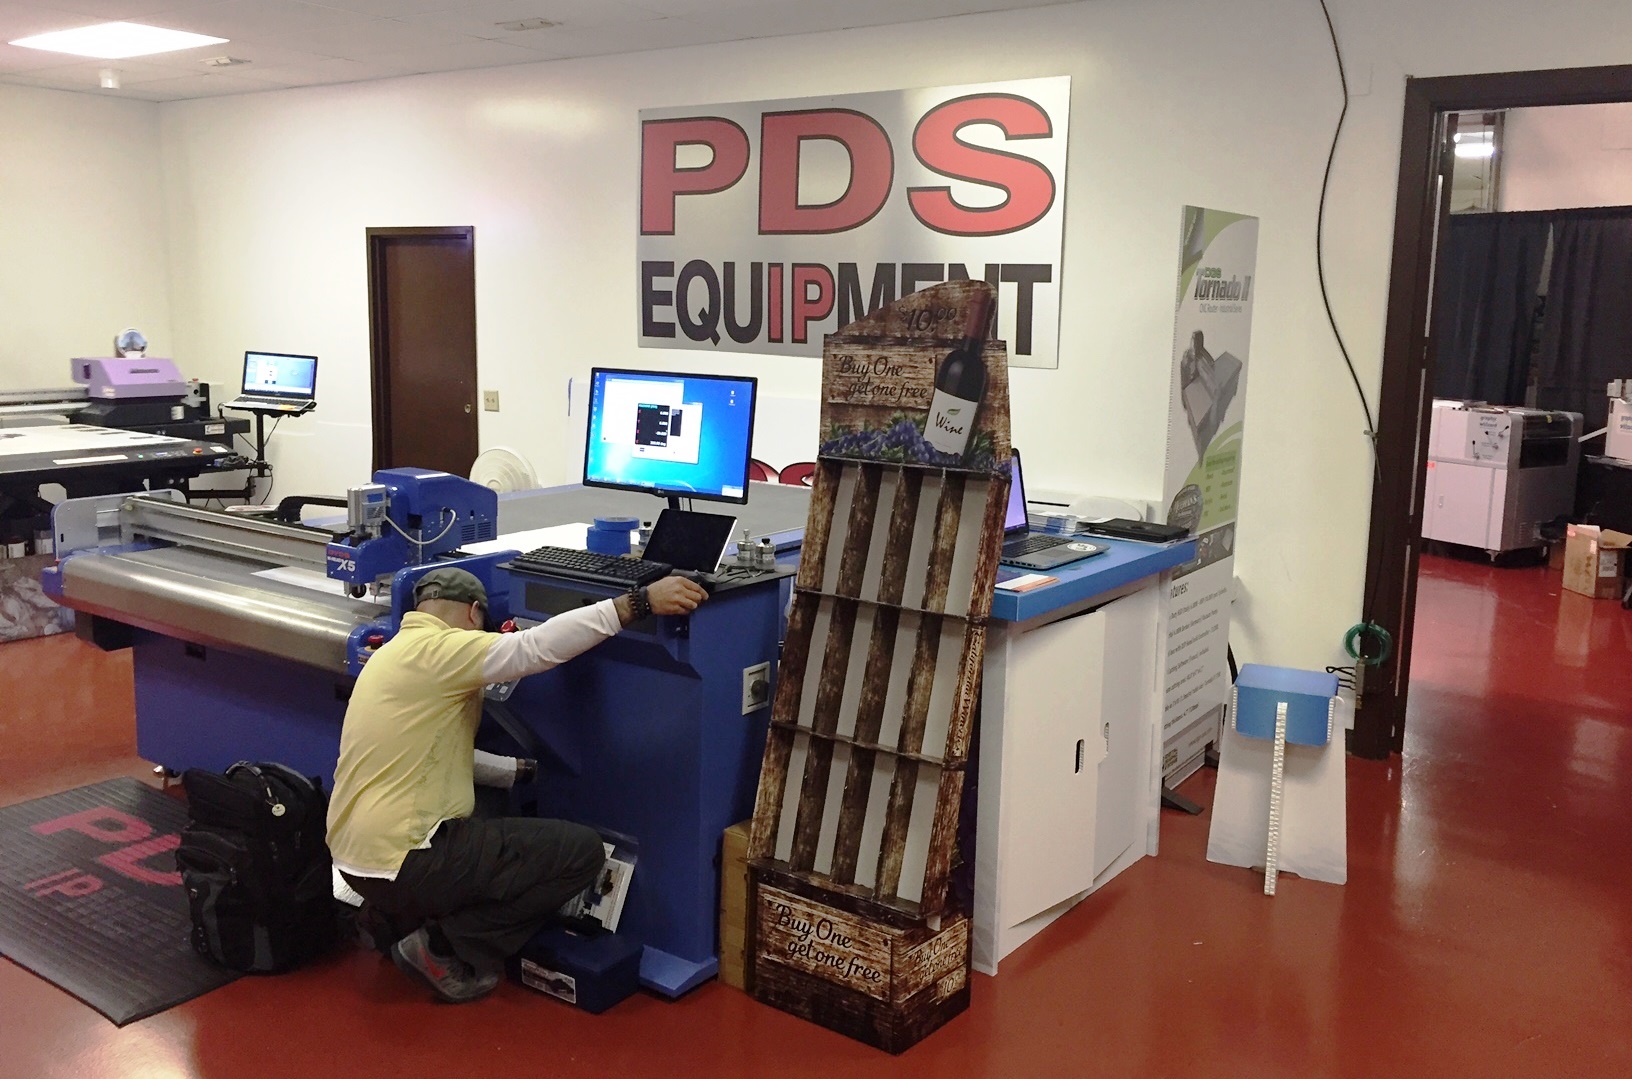 Pds Open House Showcased Our New Cutters And Was A Total Success Dgs Digital Graphic Systems